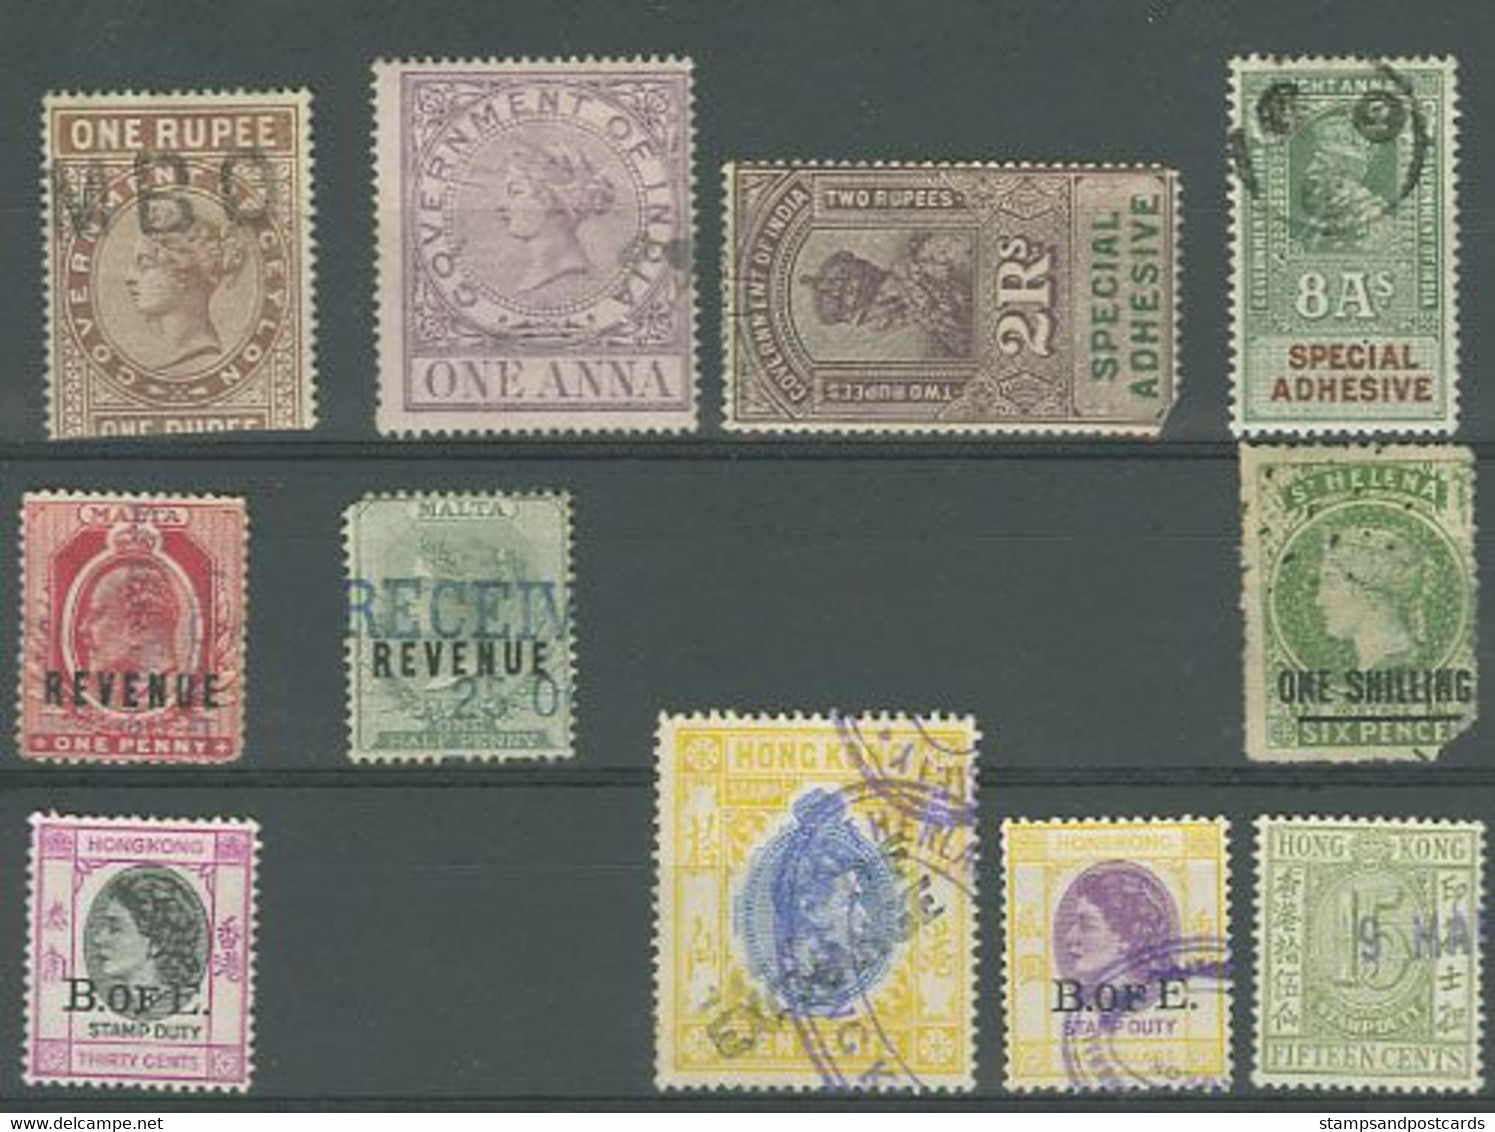 Great Britain Colonial Revenue Stamps India Malta Hong Kong China St. Helena Timbres Fiscaux - Revenue Stamps